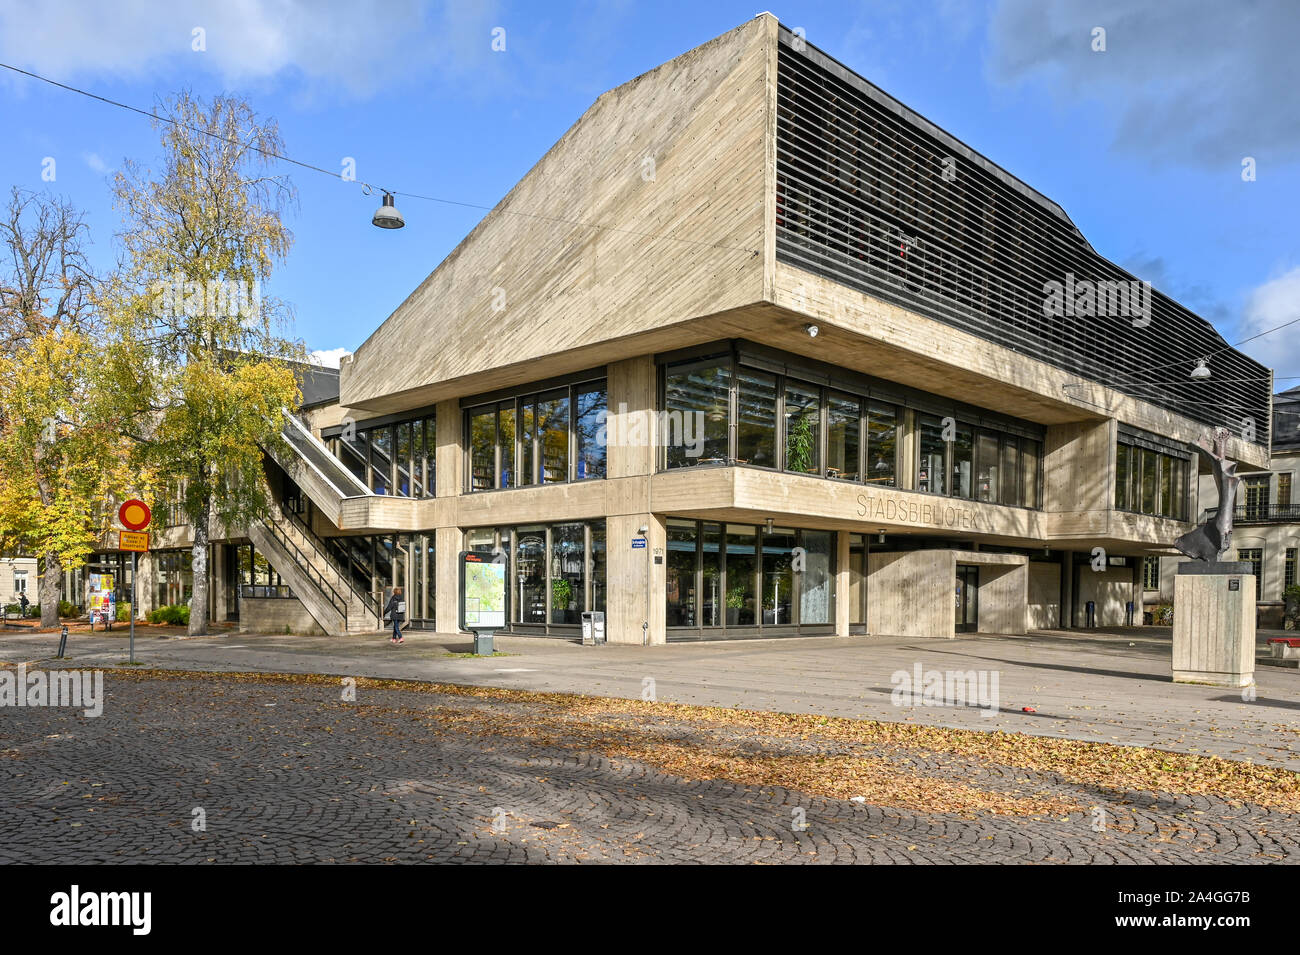 Norrkoping city library during autumn 2019. This concrete building is an example of brutalist architecture. Norrkoping is a historic industrial town i Stock Photo